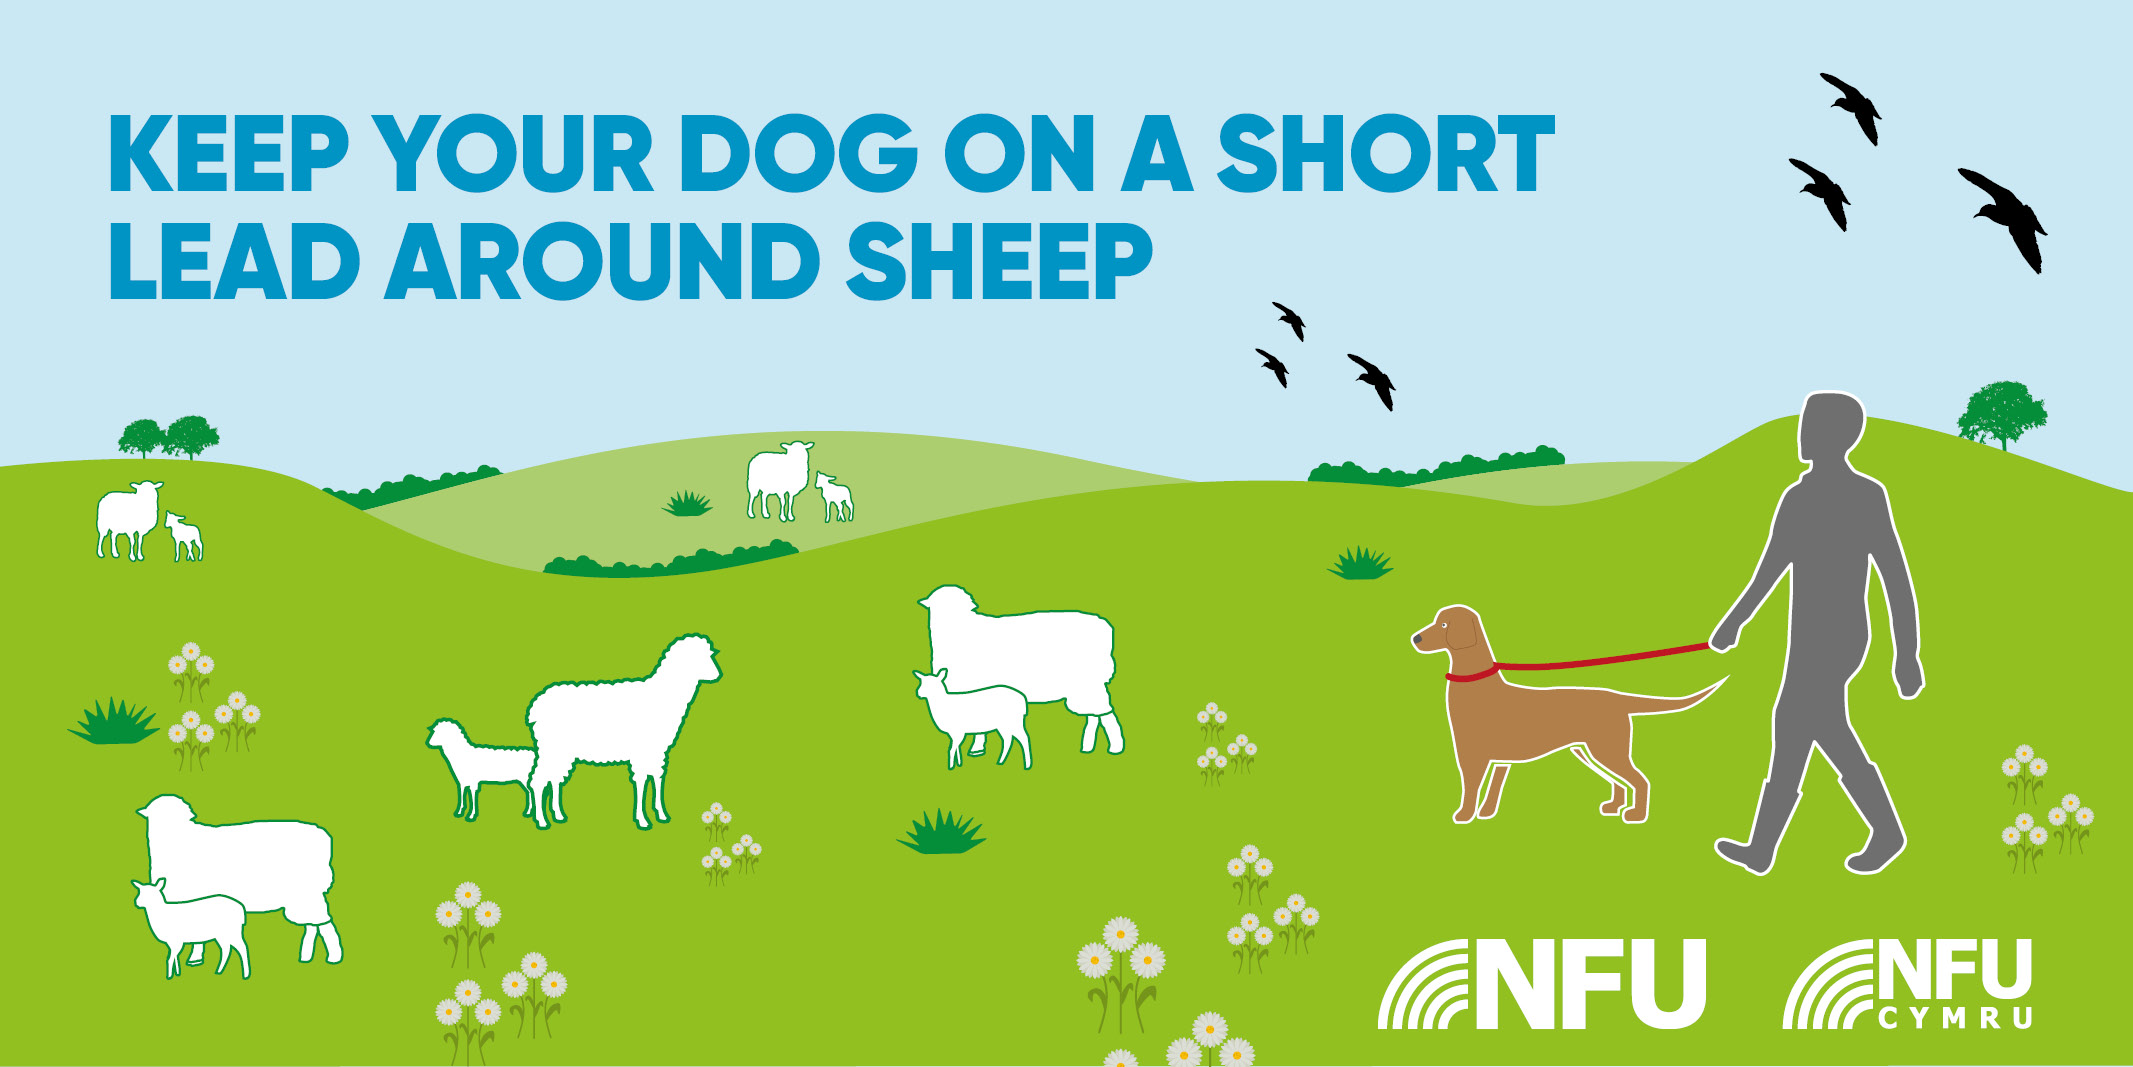 Keep dogs on short leads around sheep